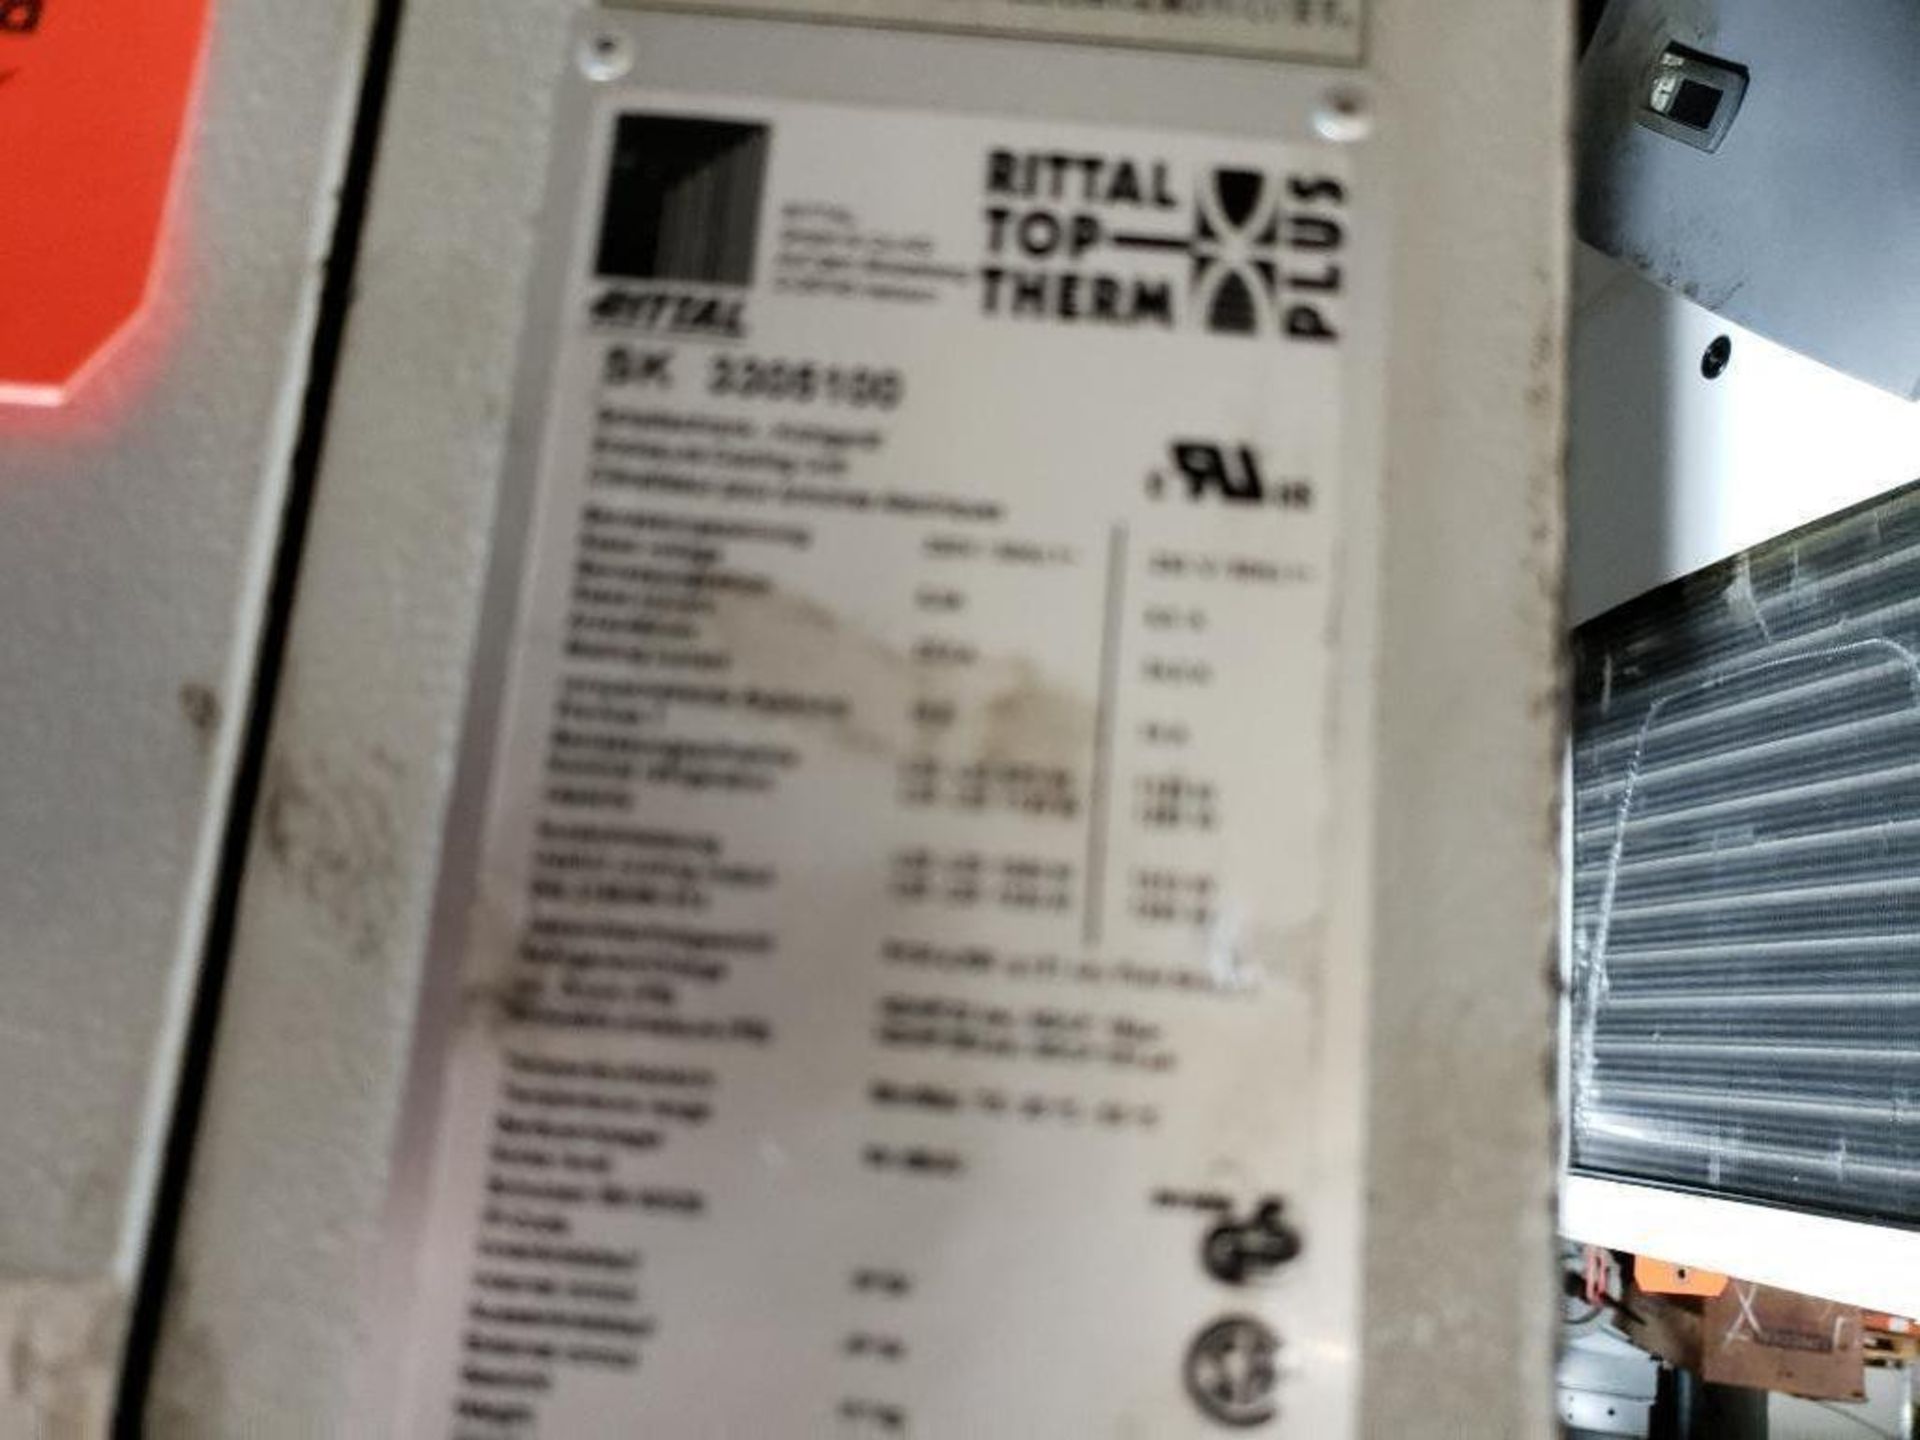 Rittal electronic enclosure air conditioner. Model number SK-3305100. - Image 2 of 3